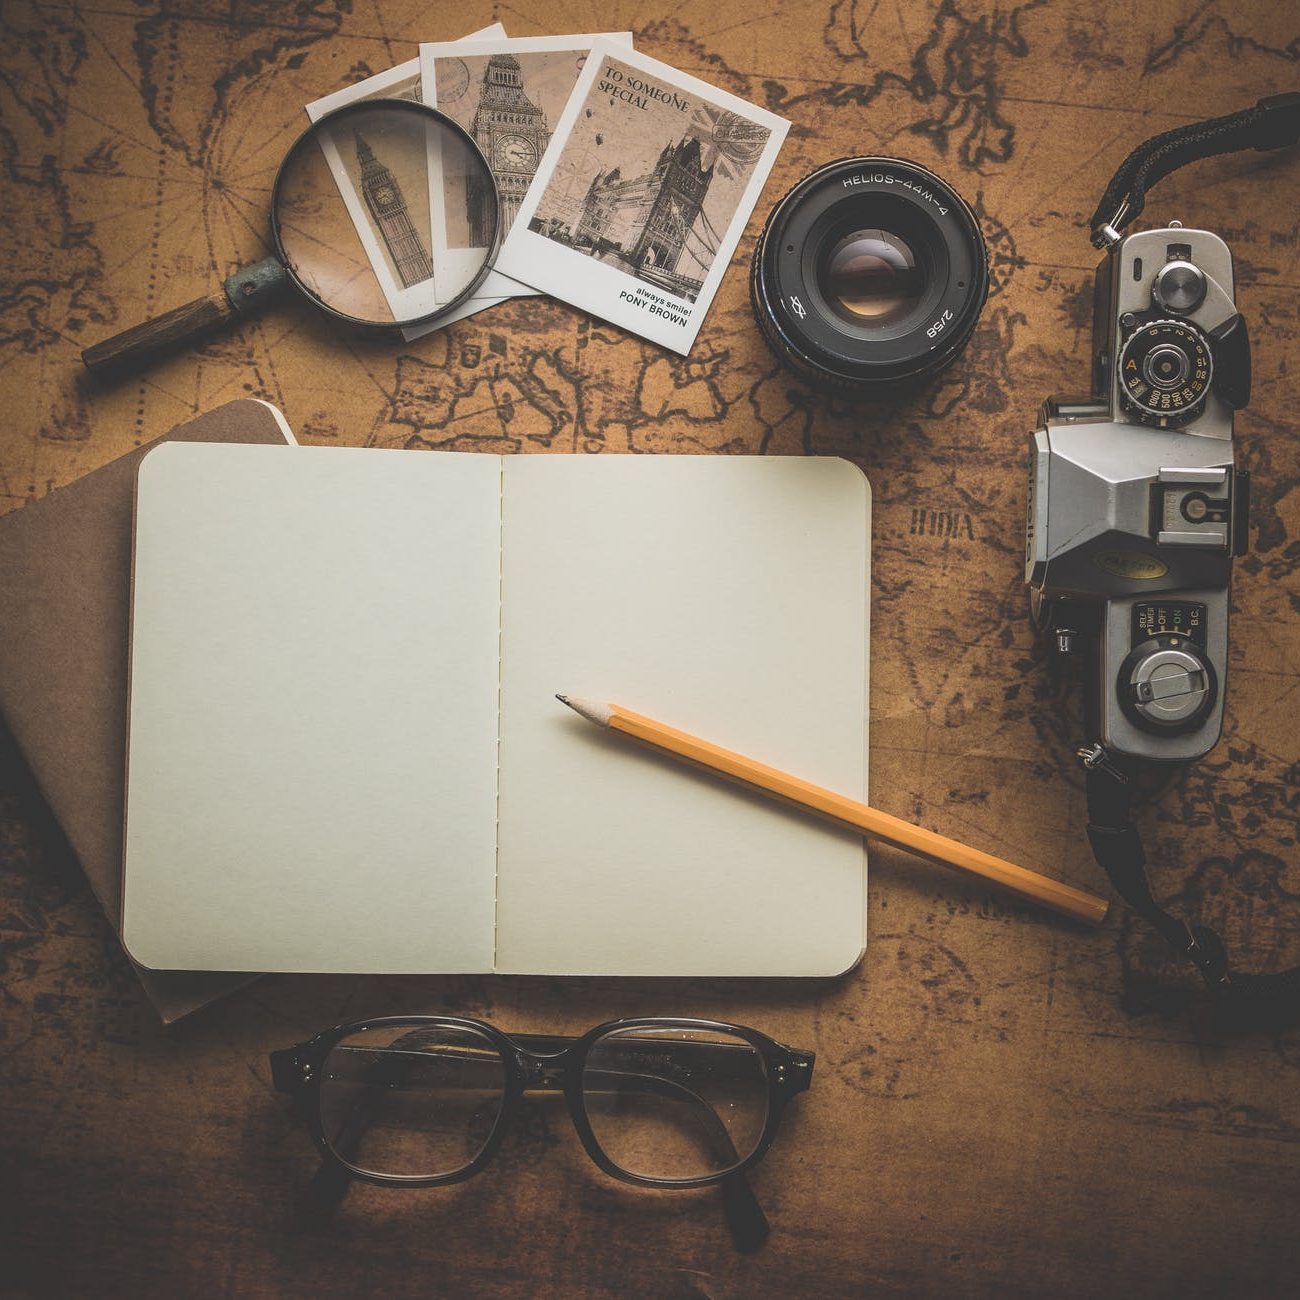 Photograph of a writers notebook, old photos, glasses and a pen.